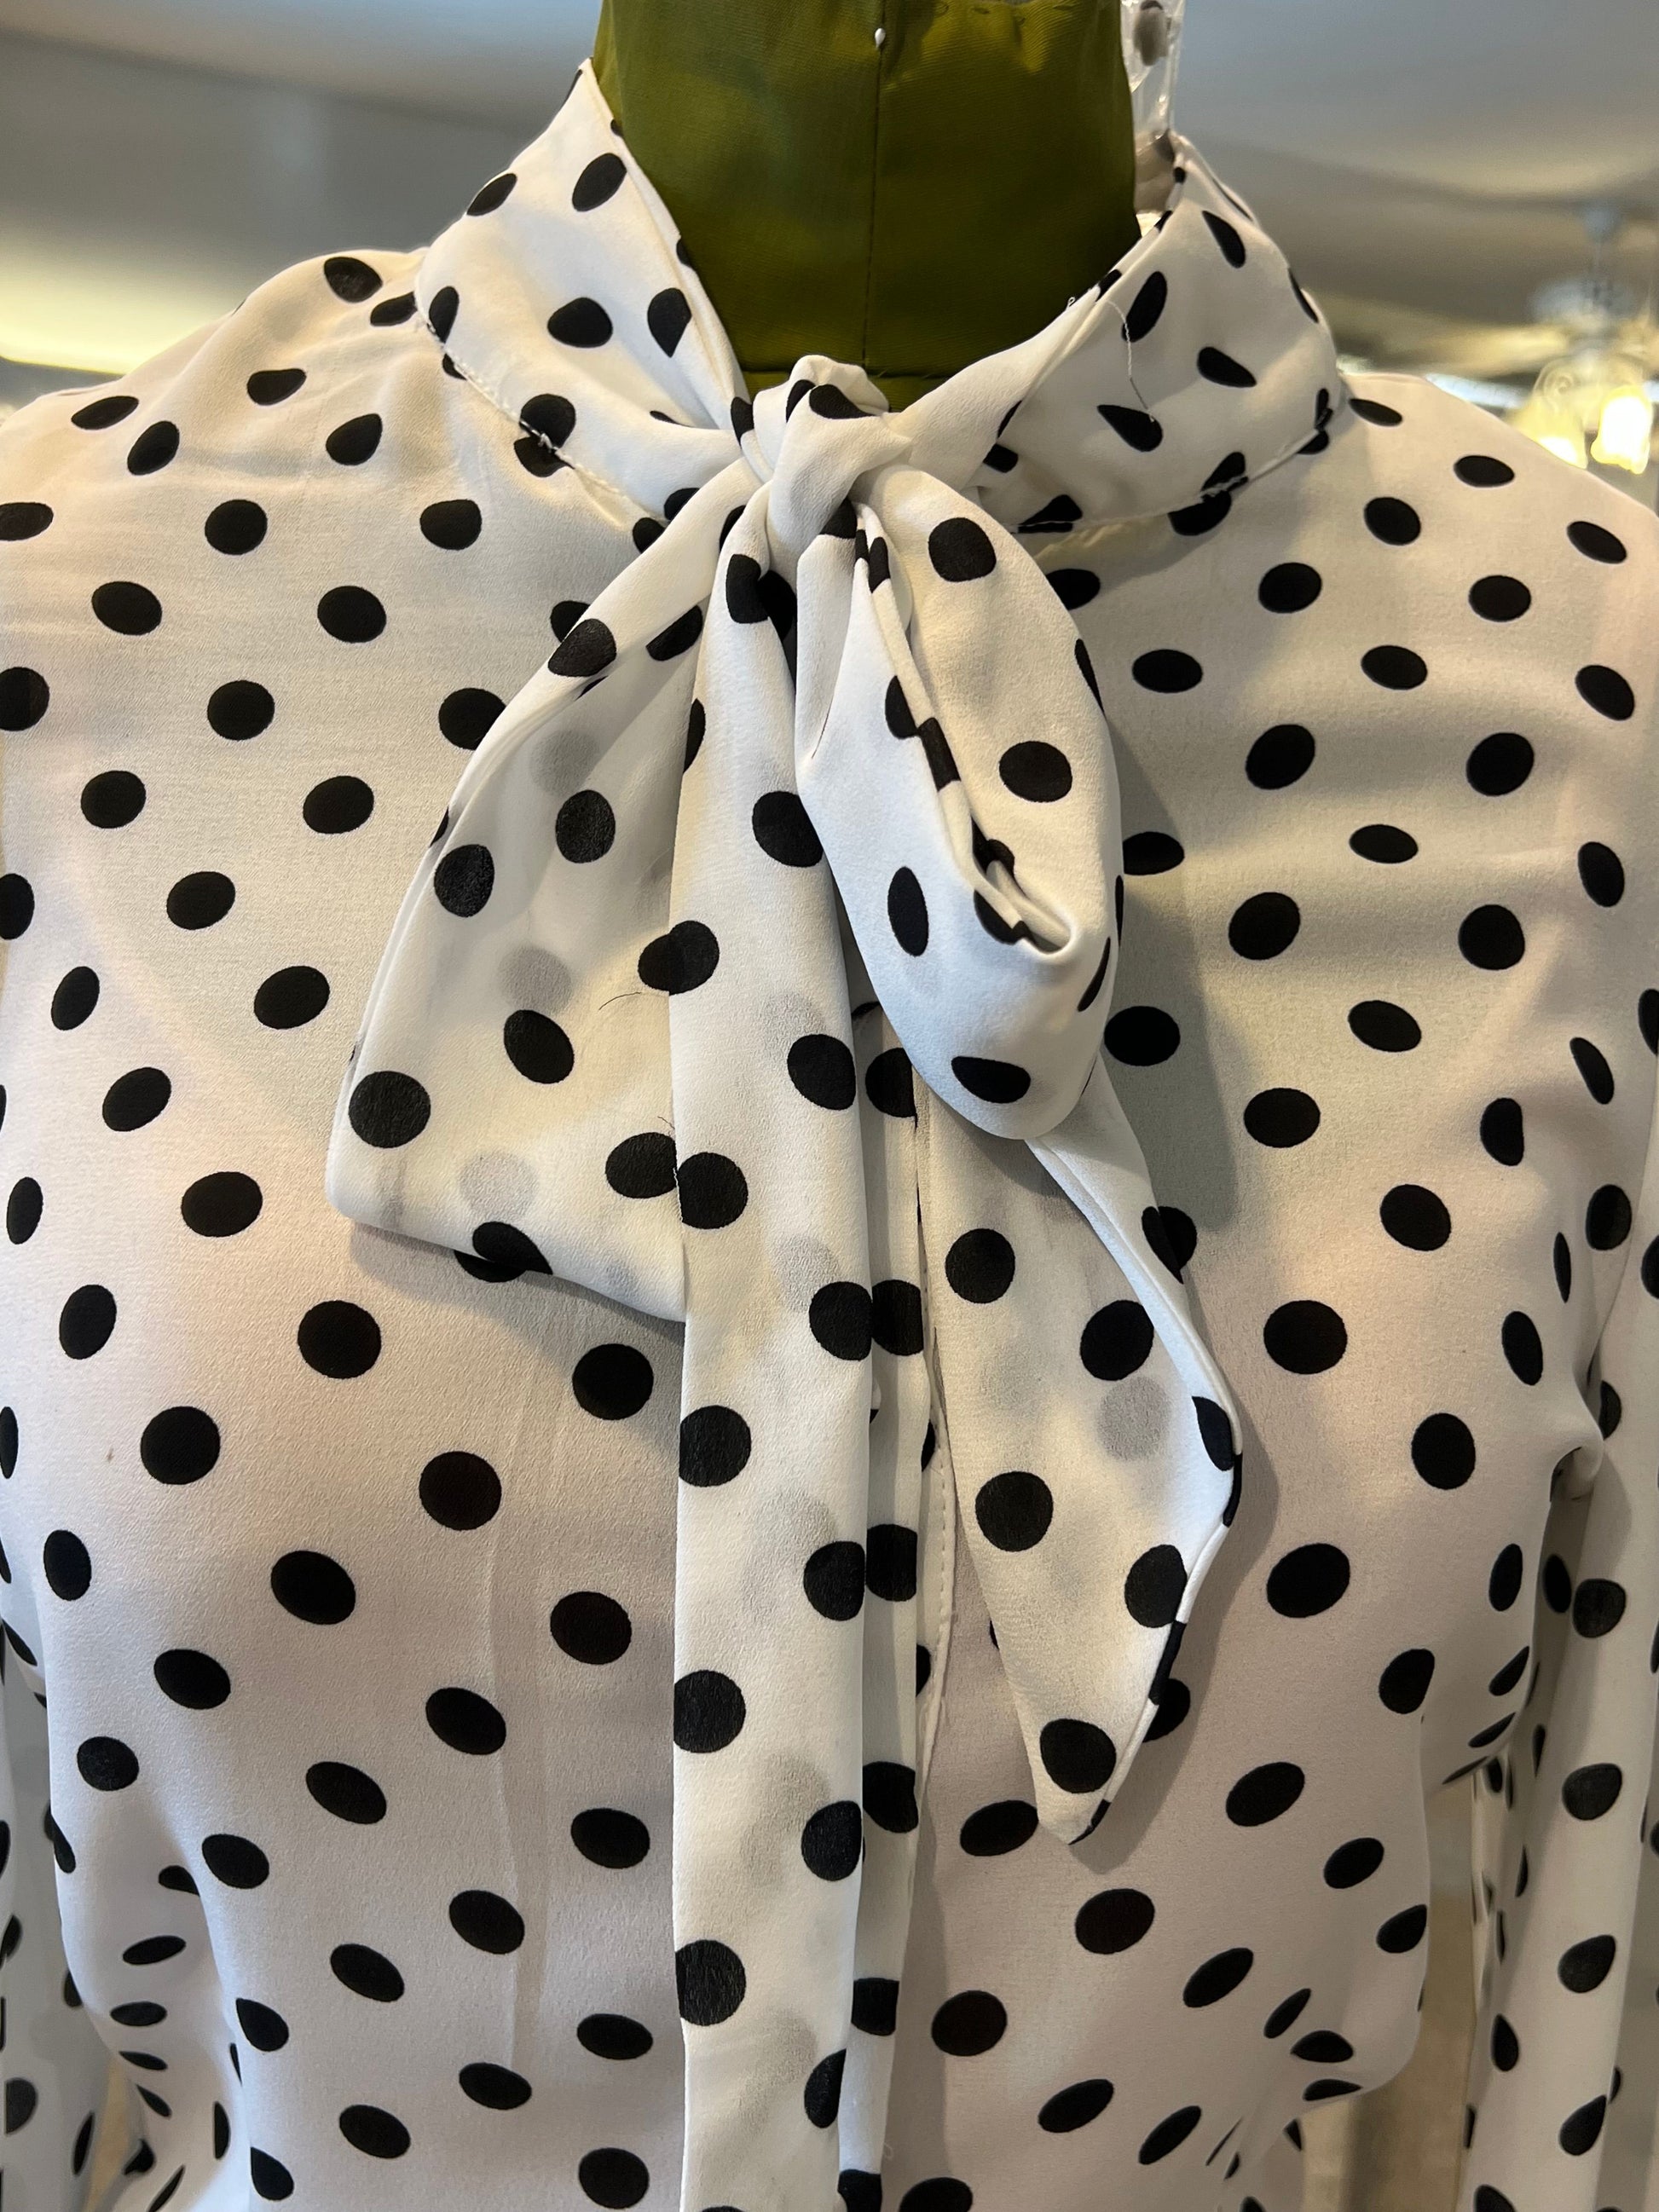 Tie in front 1940s and 50s inspired blouse with polka dots